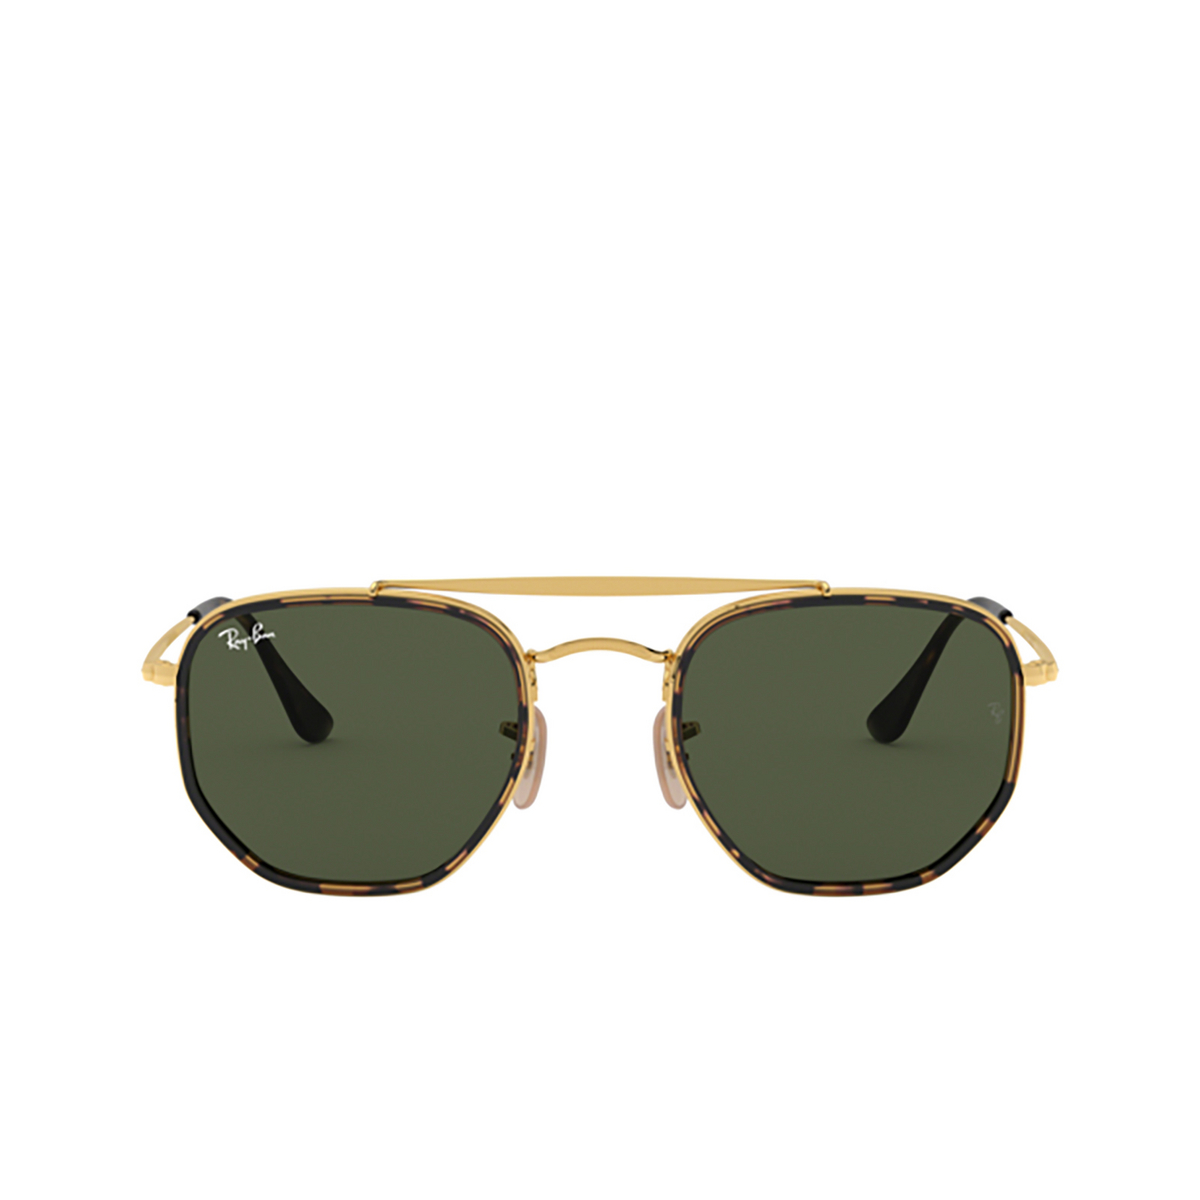 Ray-Ban THE MARSHAL II Sunglasses 001 GOLD - front view